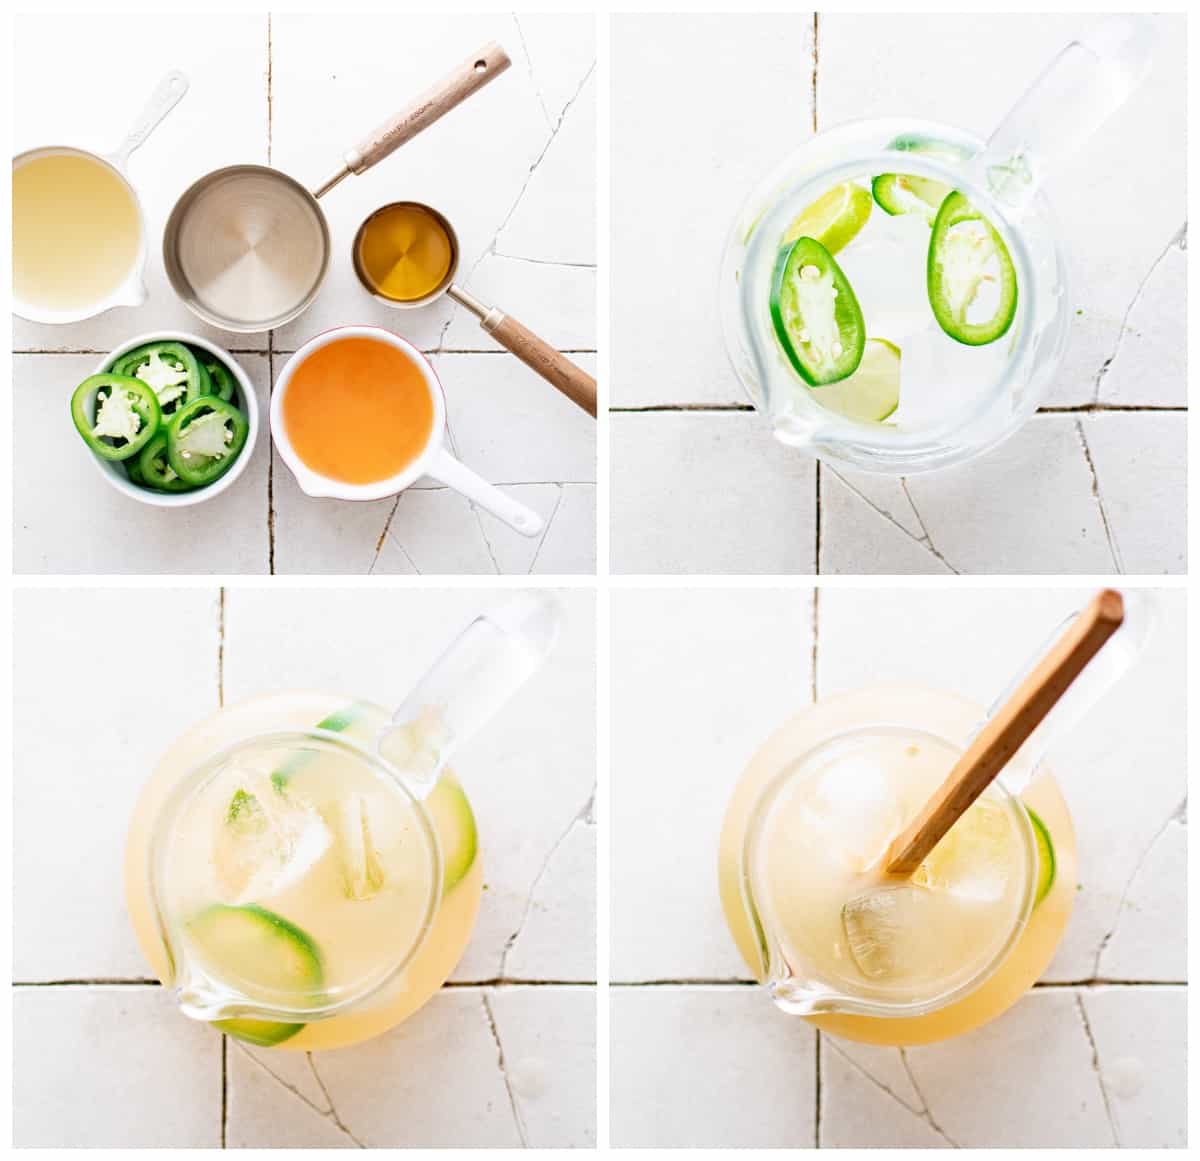 how to make jalapeño margaritas step by step photo instructions